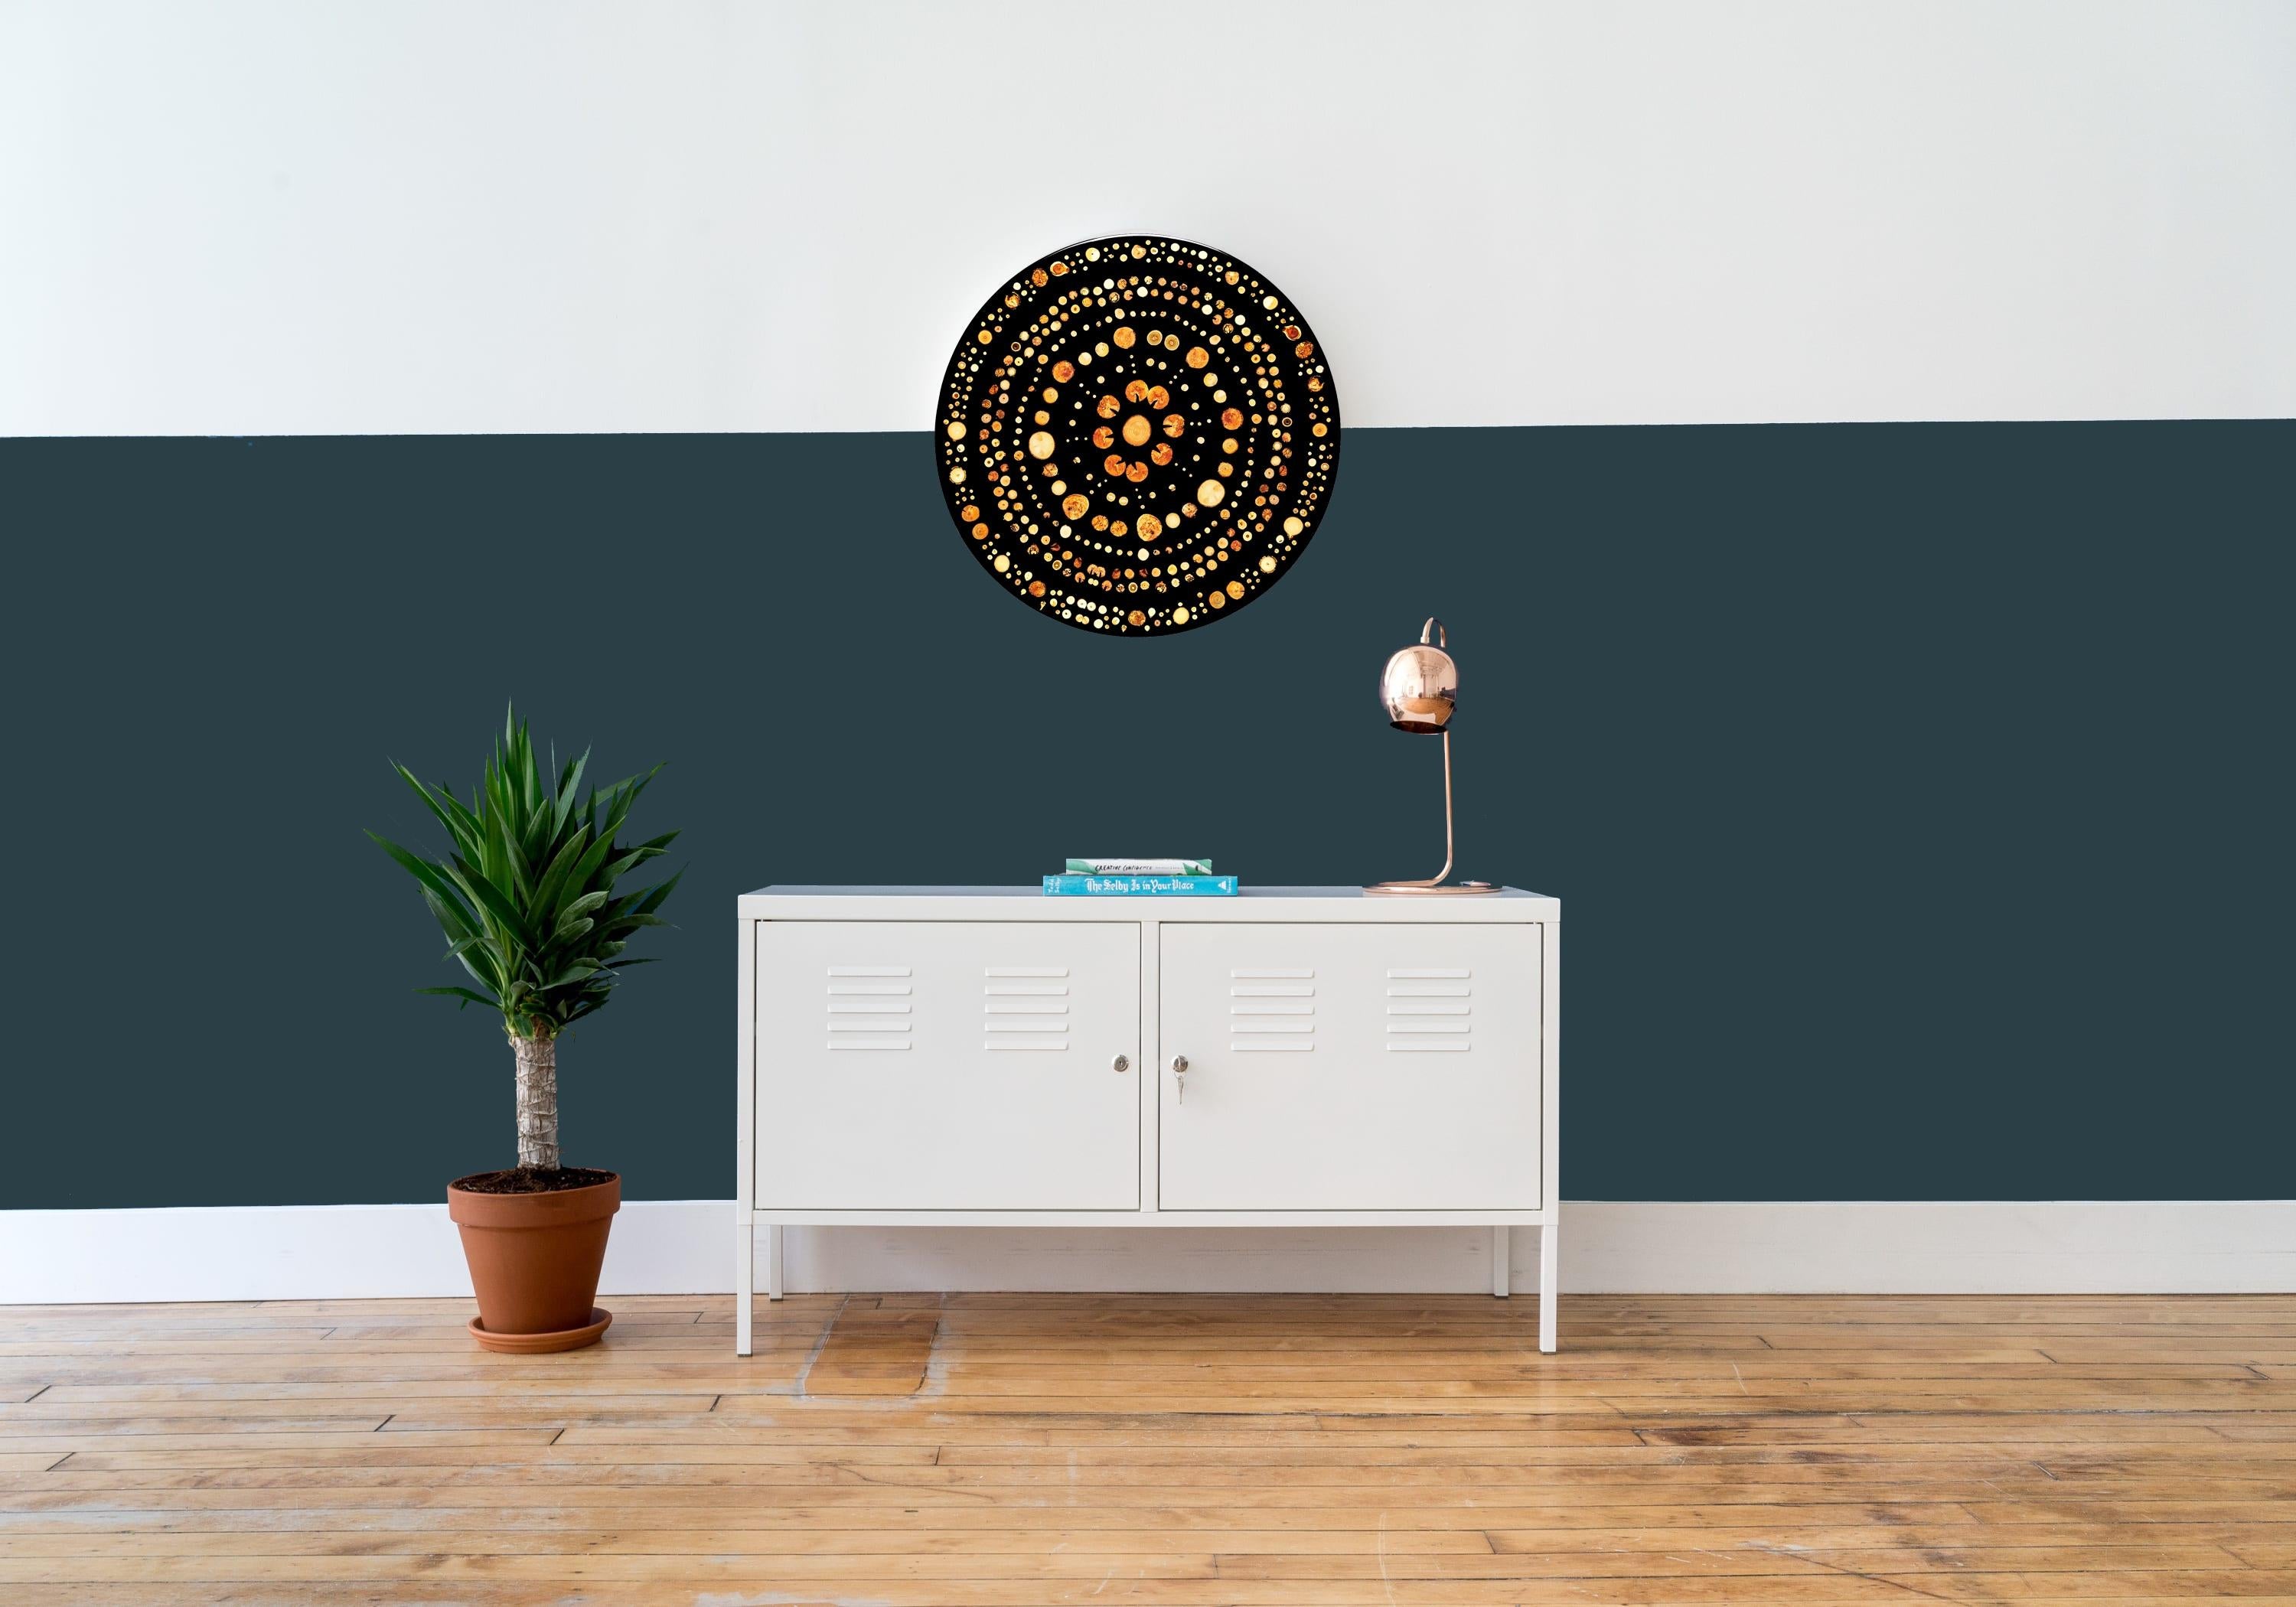 Atlas’ wall hanging features various fruit wood end-grain embedded in ABDB midnight black resin. Complete with pieces necessary to place on wall.

Measures: 23” diameter.

Handmade by Djivan Schapira. Lead time: 6-8 weeks. Ships from New